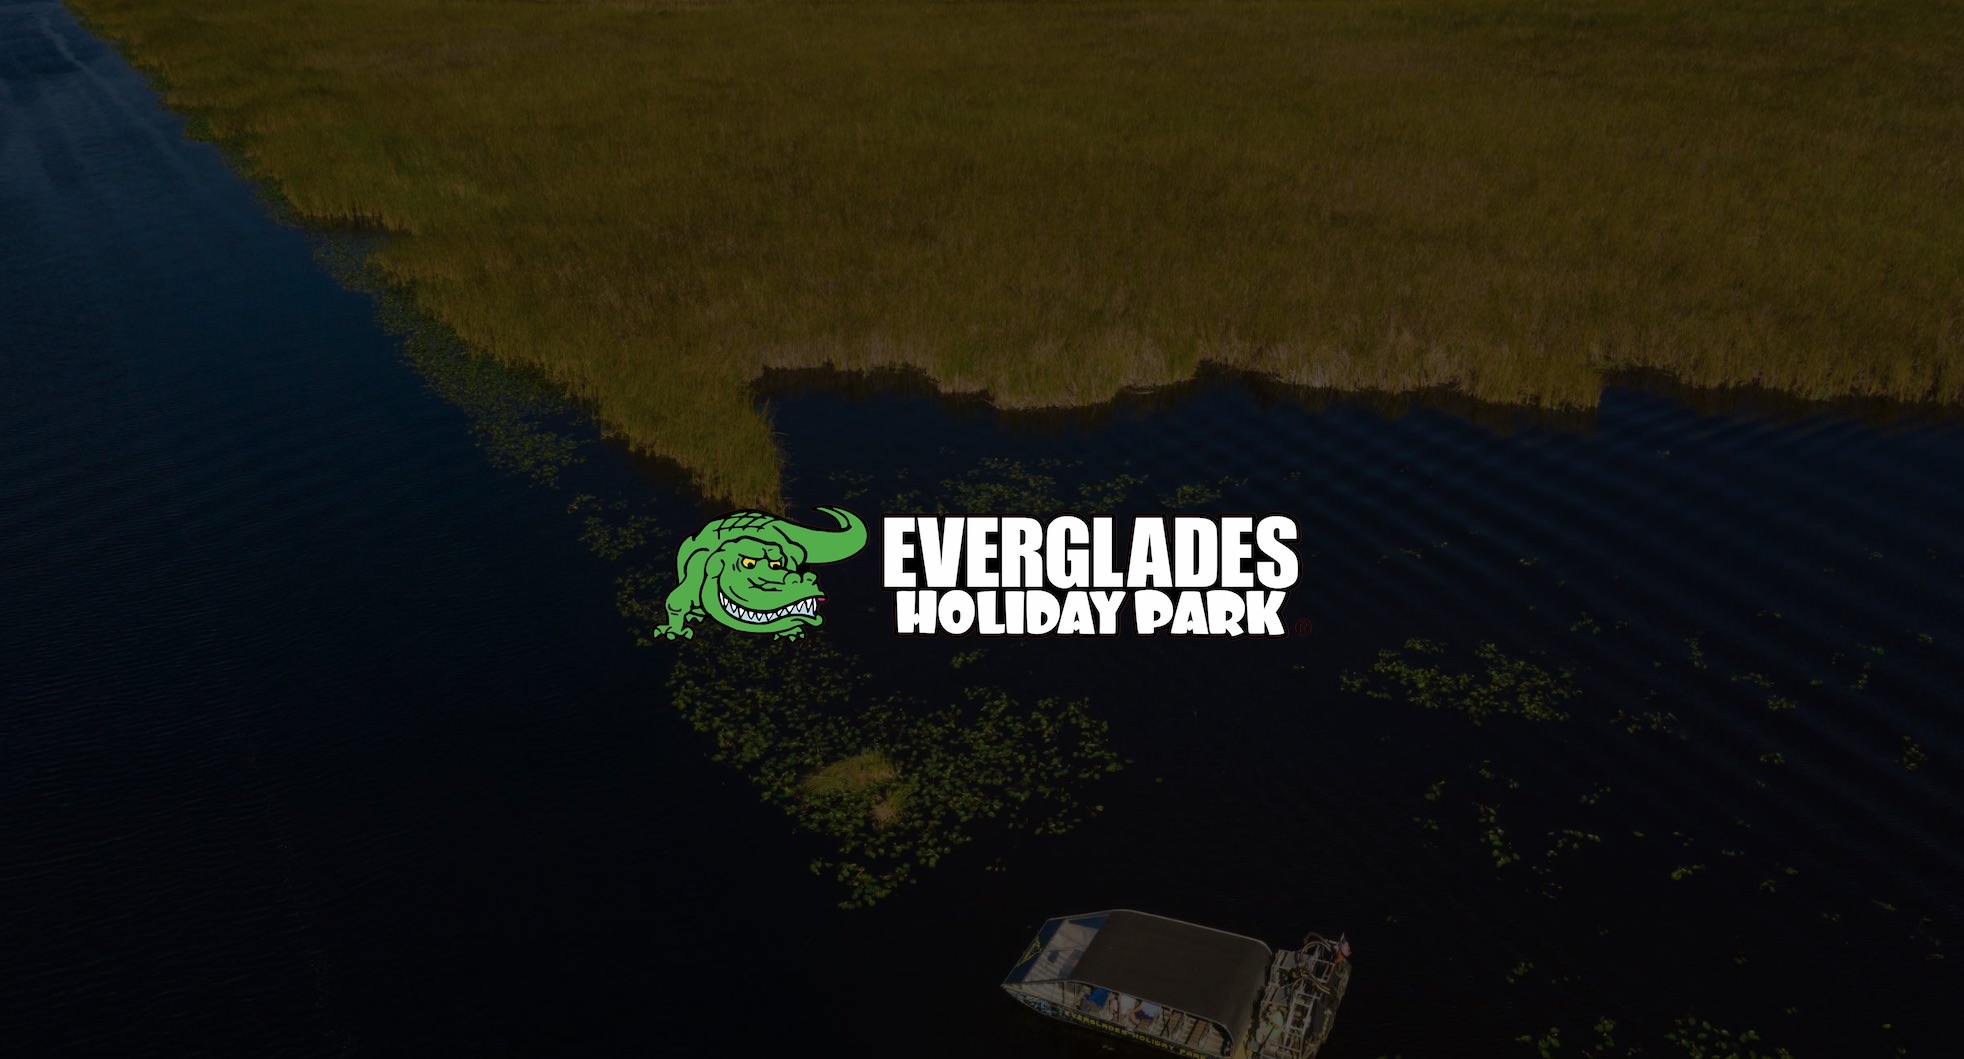 IU C&I Studios Page Green and white Everglades Holiday Park logo Social Media Marketing by C&I Studios over a dimmed background aerial view of an airboat on the water